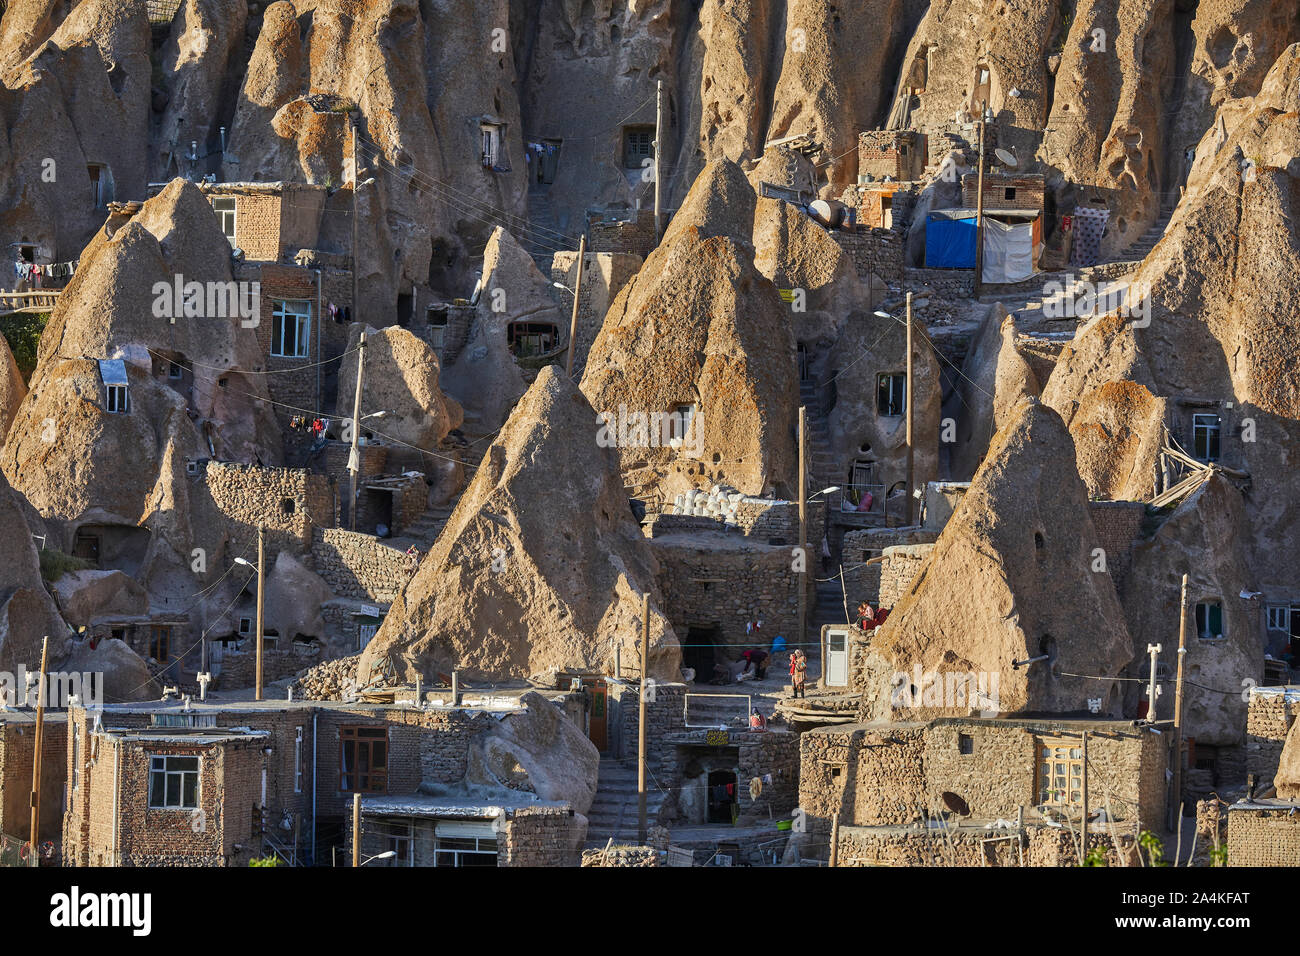 The rock village Kandovan south of Tabriz in Iran, taken on 31.05.2017. The village is located at the outlet of the northwestern Sahand Mountains, about 2,200 meters high. It is built directly into the rocks. | usage worldwide Stock Photo